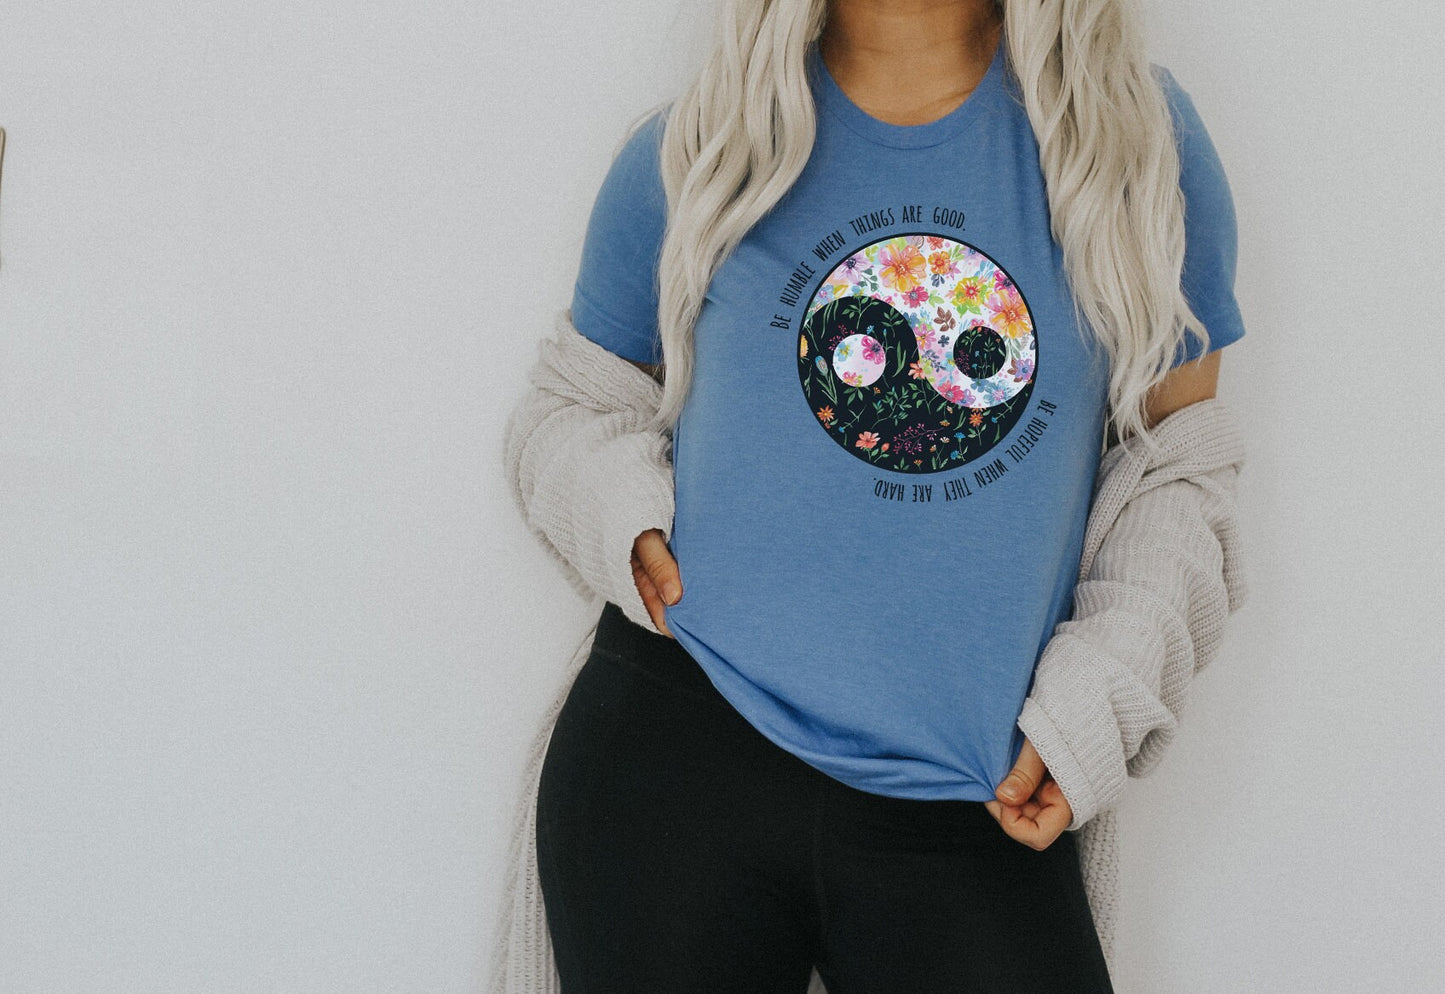 Whimsical Floral Yin Yang Be Humble When things are good Be Hopeful when they are hard Unisex Soft Tee T-shirt for Women or Men